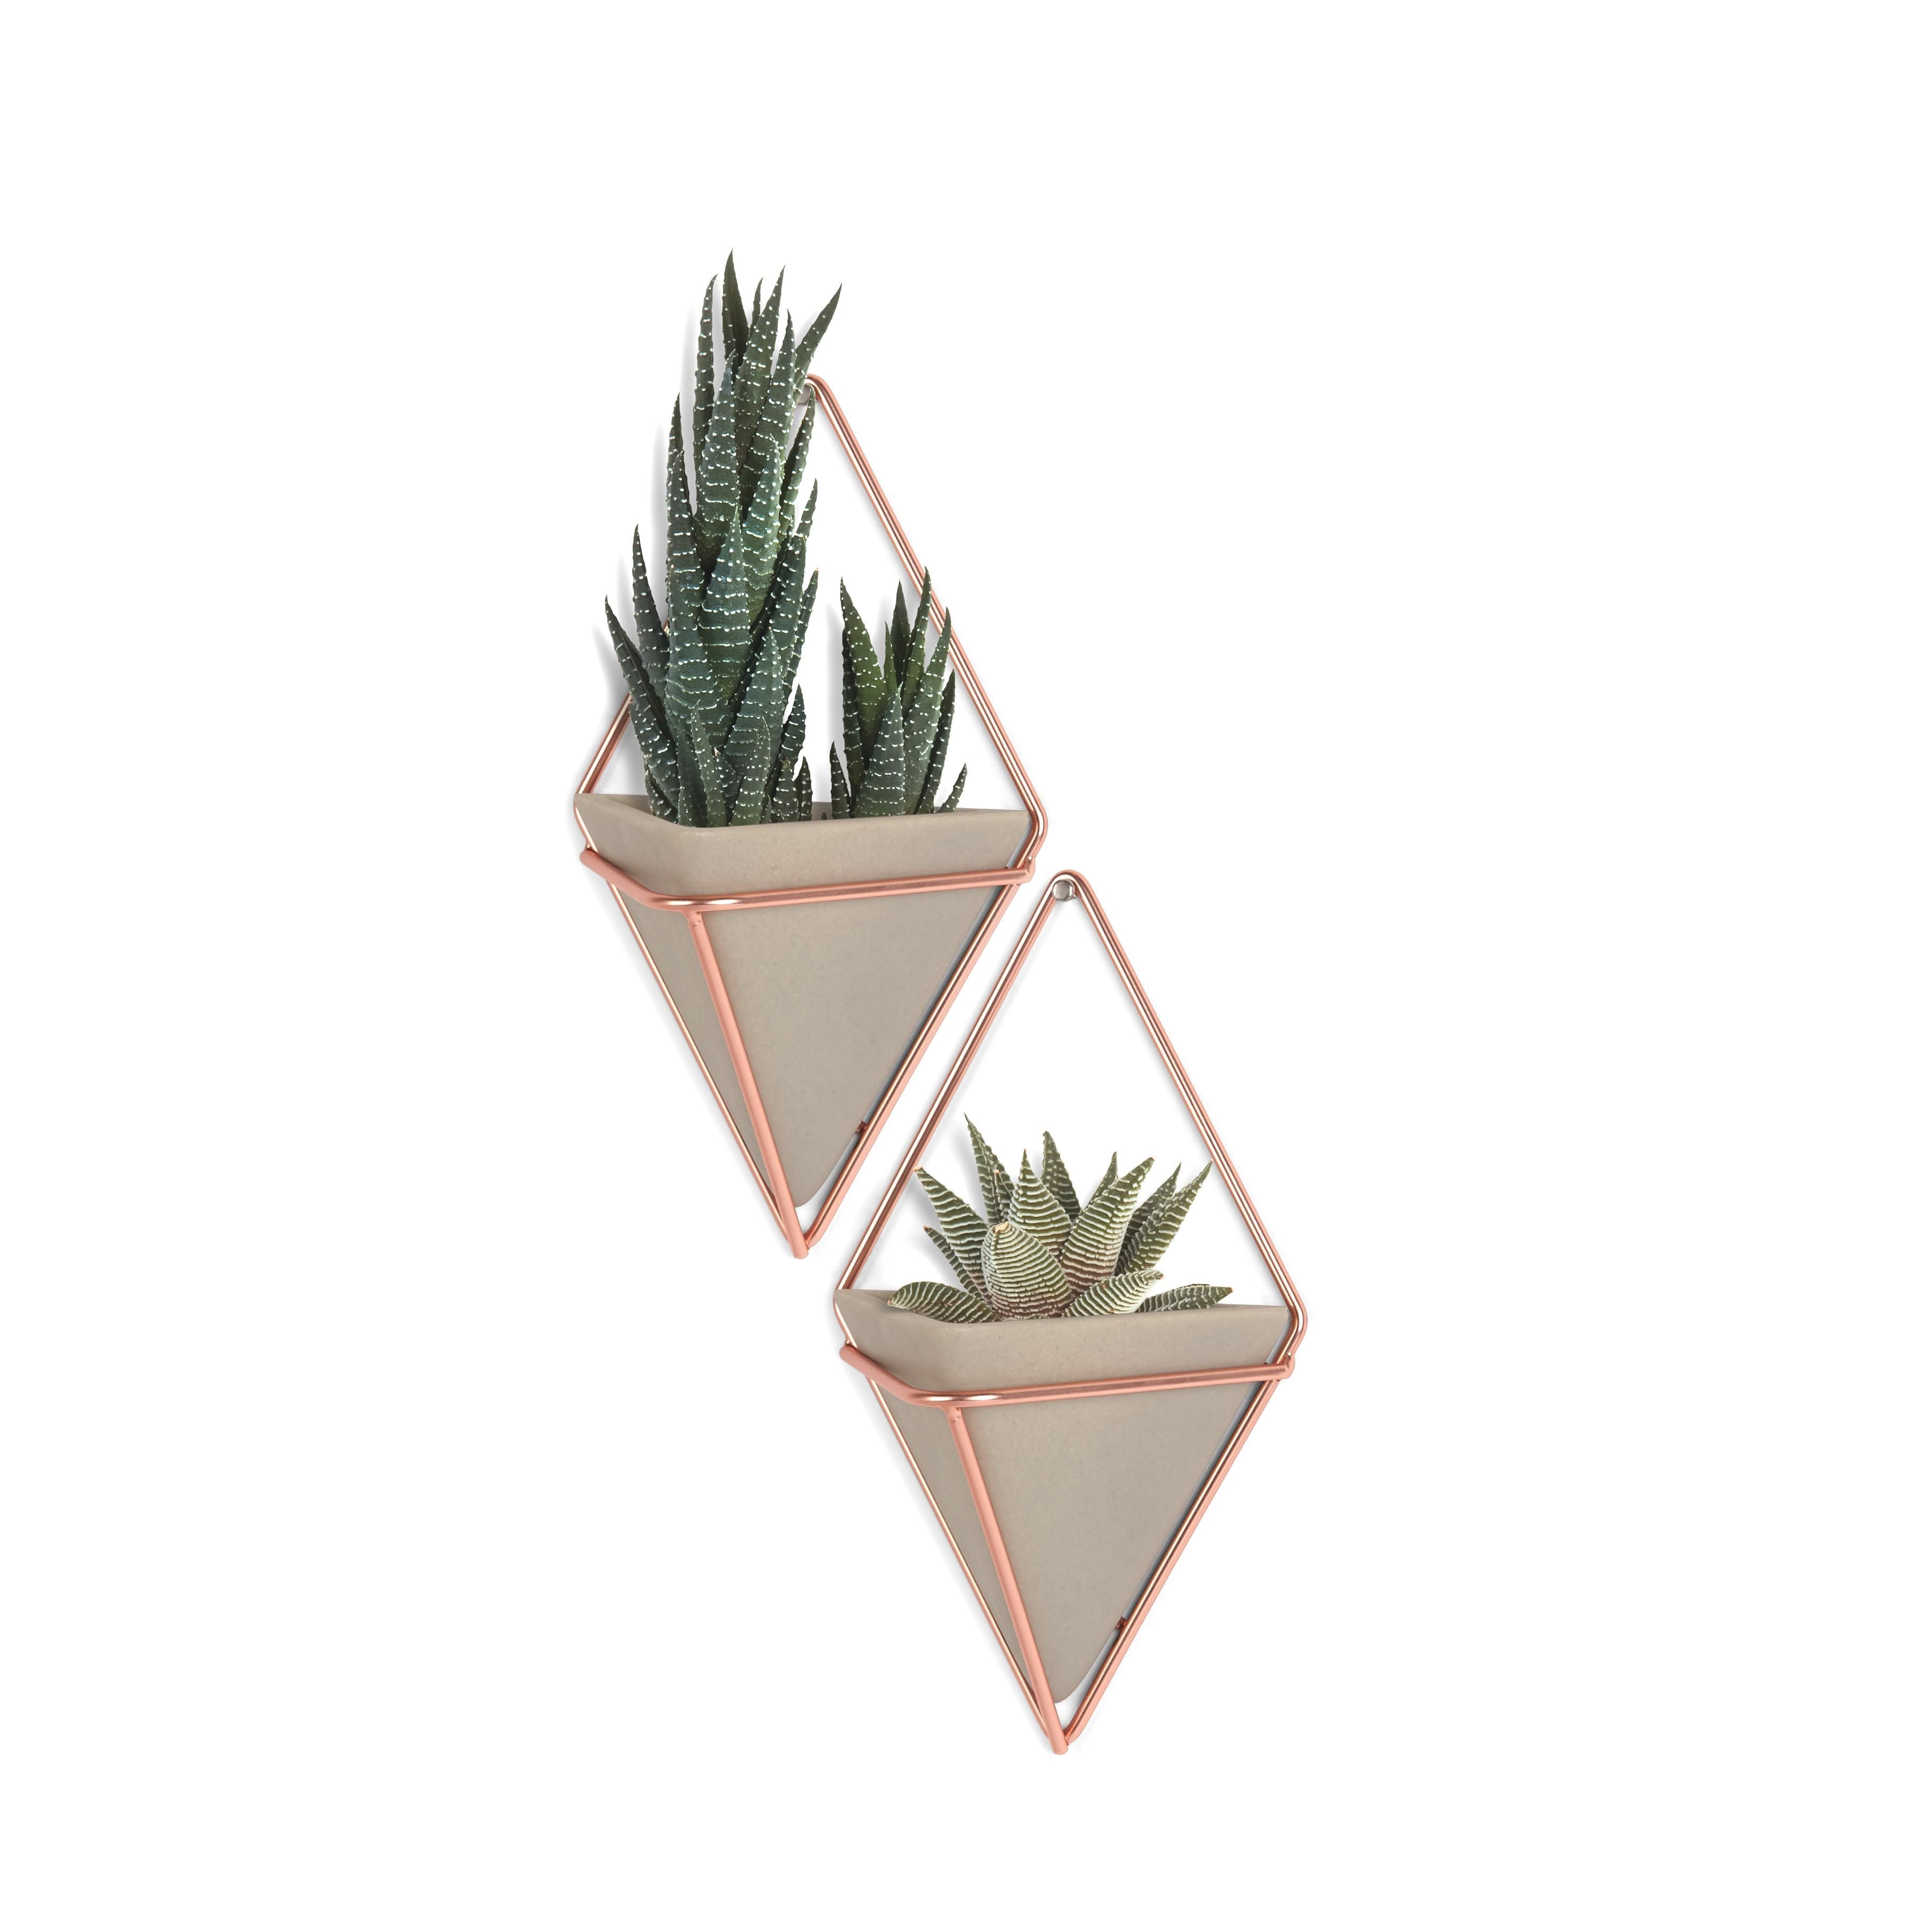 Trigg Ceramic Planter Wall Decor Pertaining To Most Recent Umbra Trigg Hanging Planter Vase & Geometric Wall Decor Container (View 1 of 20)